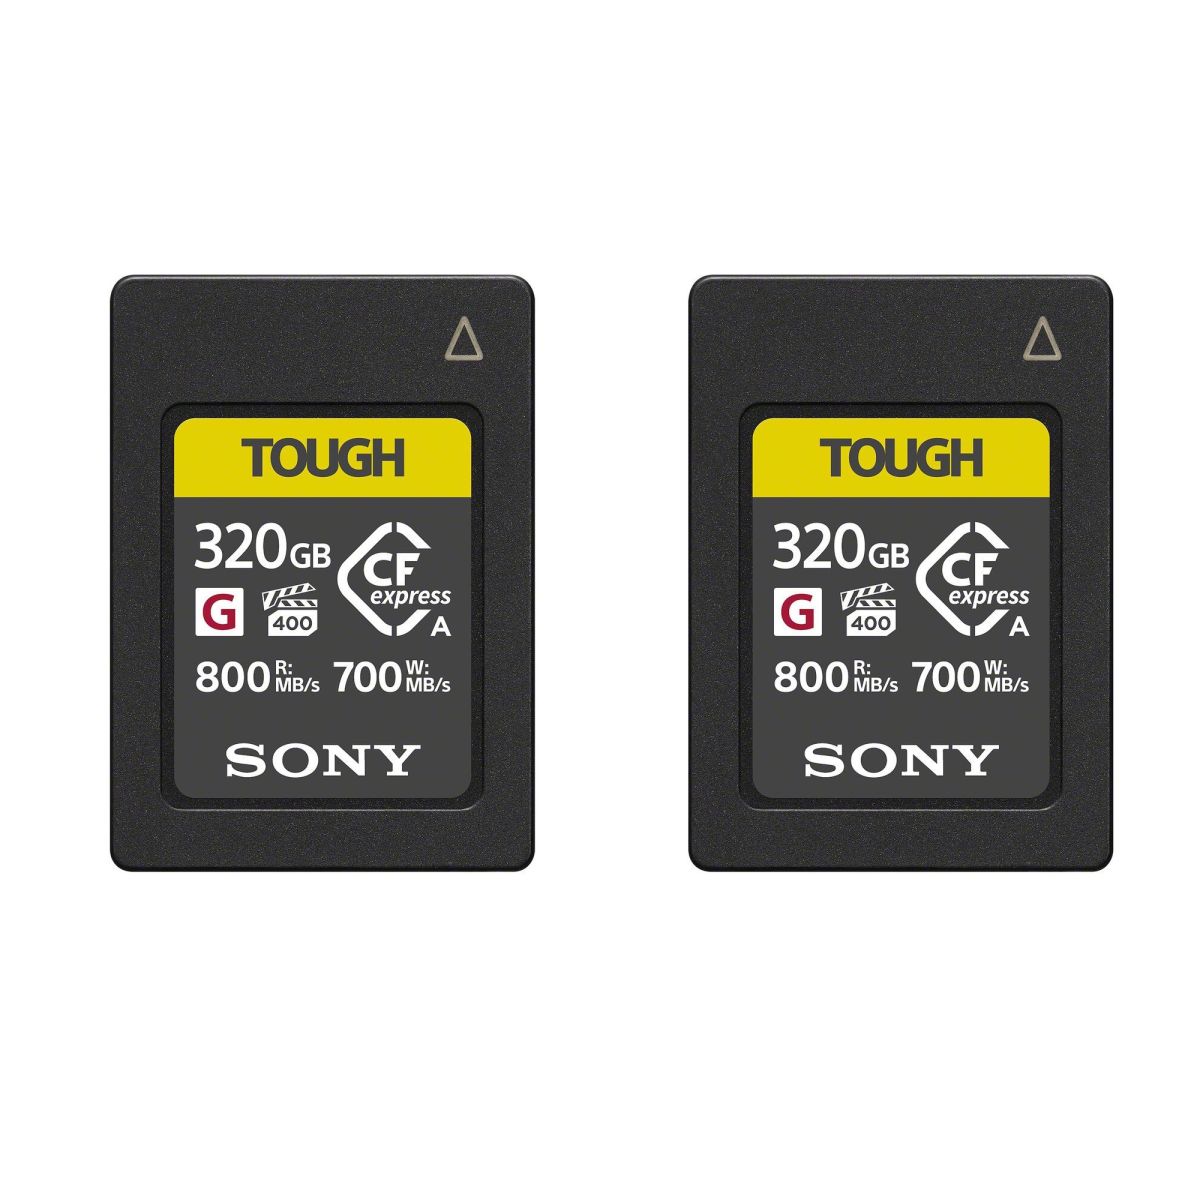 Sony TWO 320GB CFexpress Type A TOUGH Memory Cards